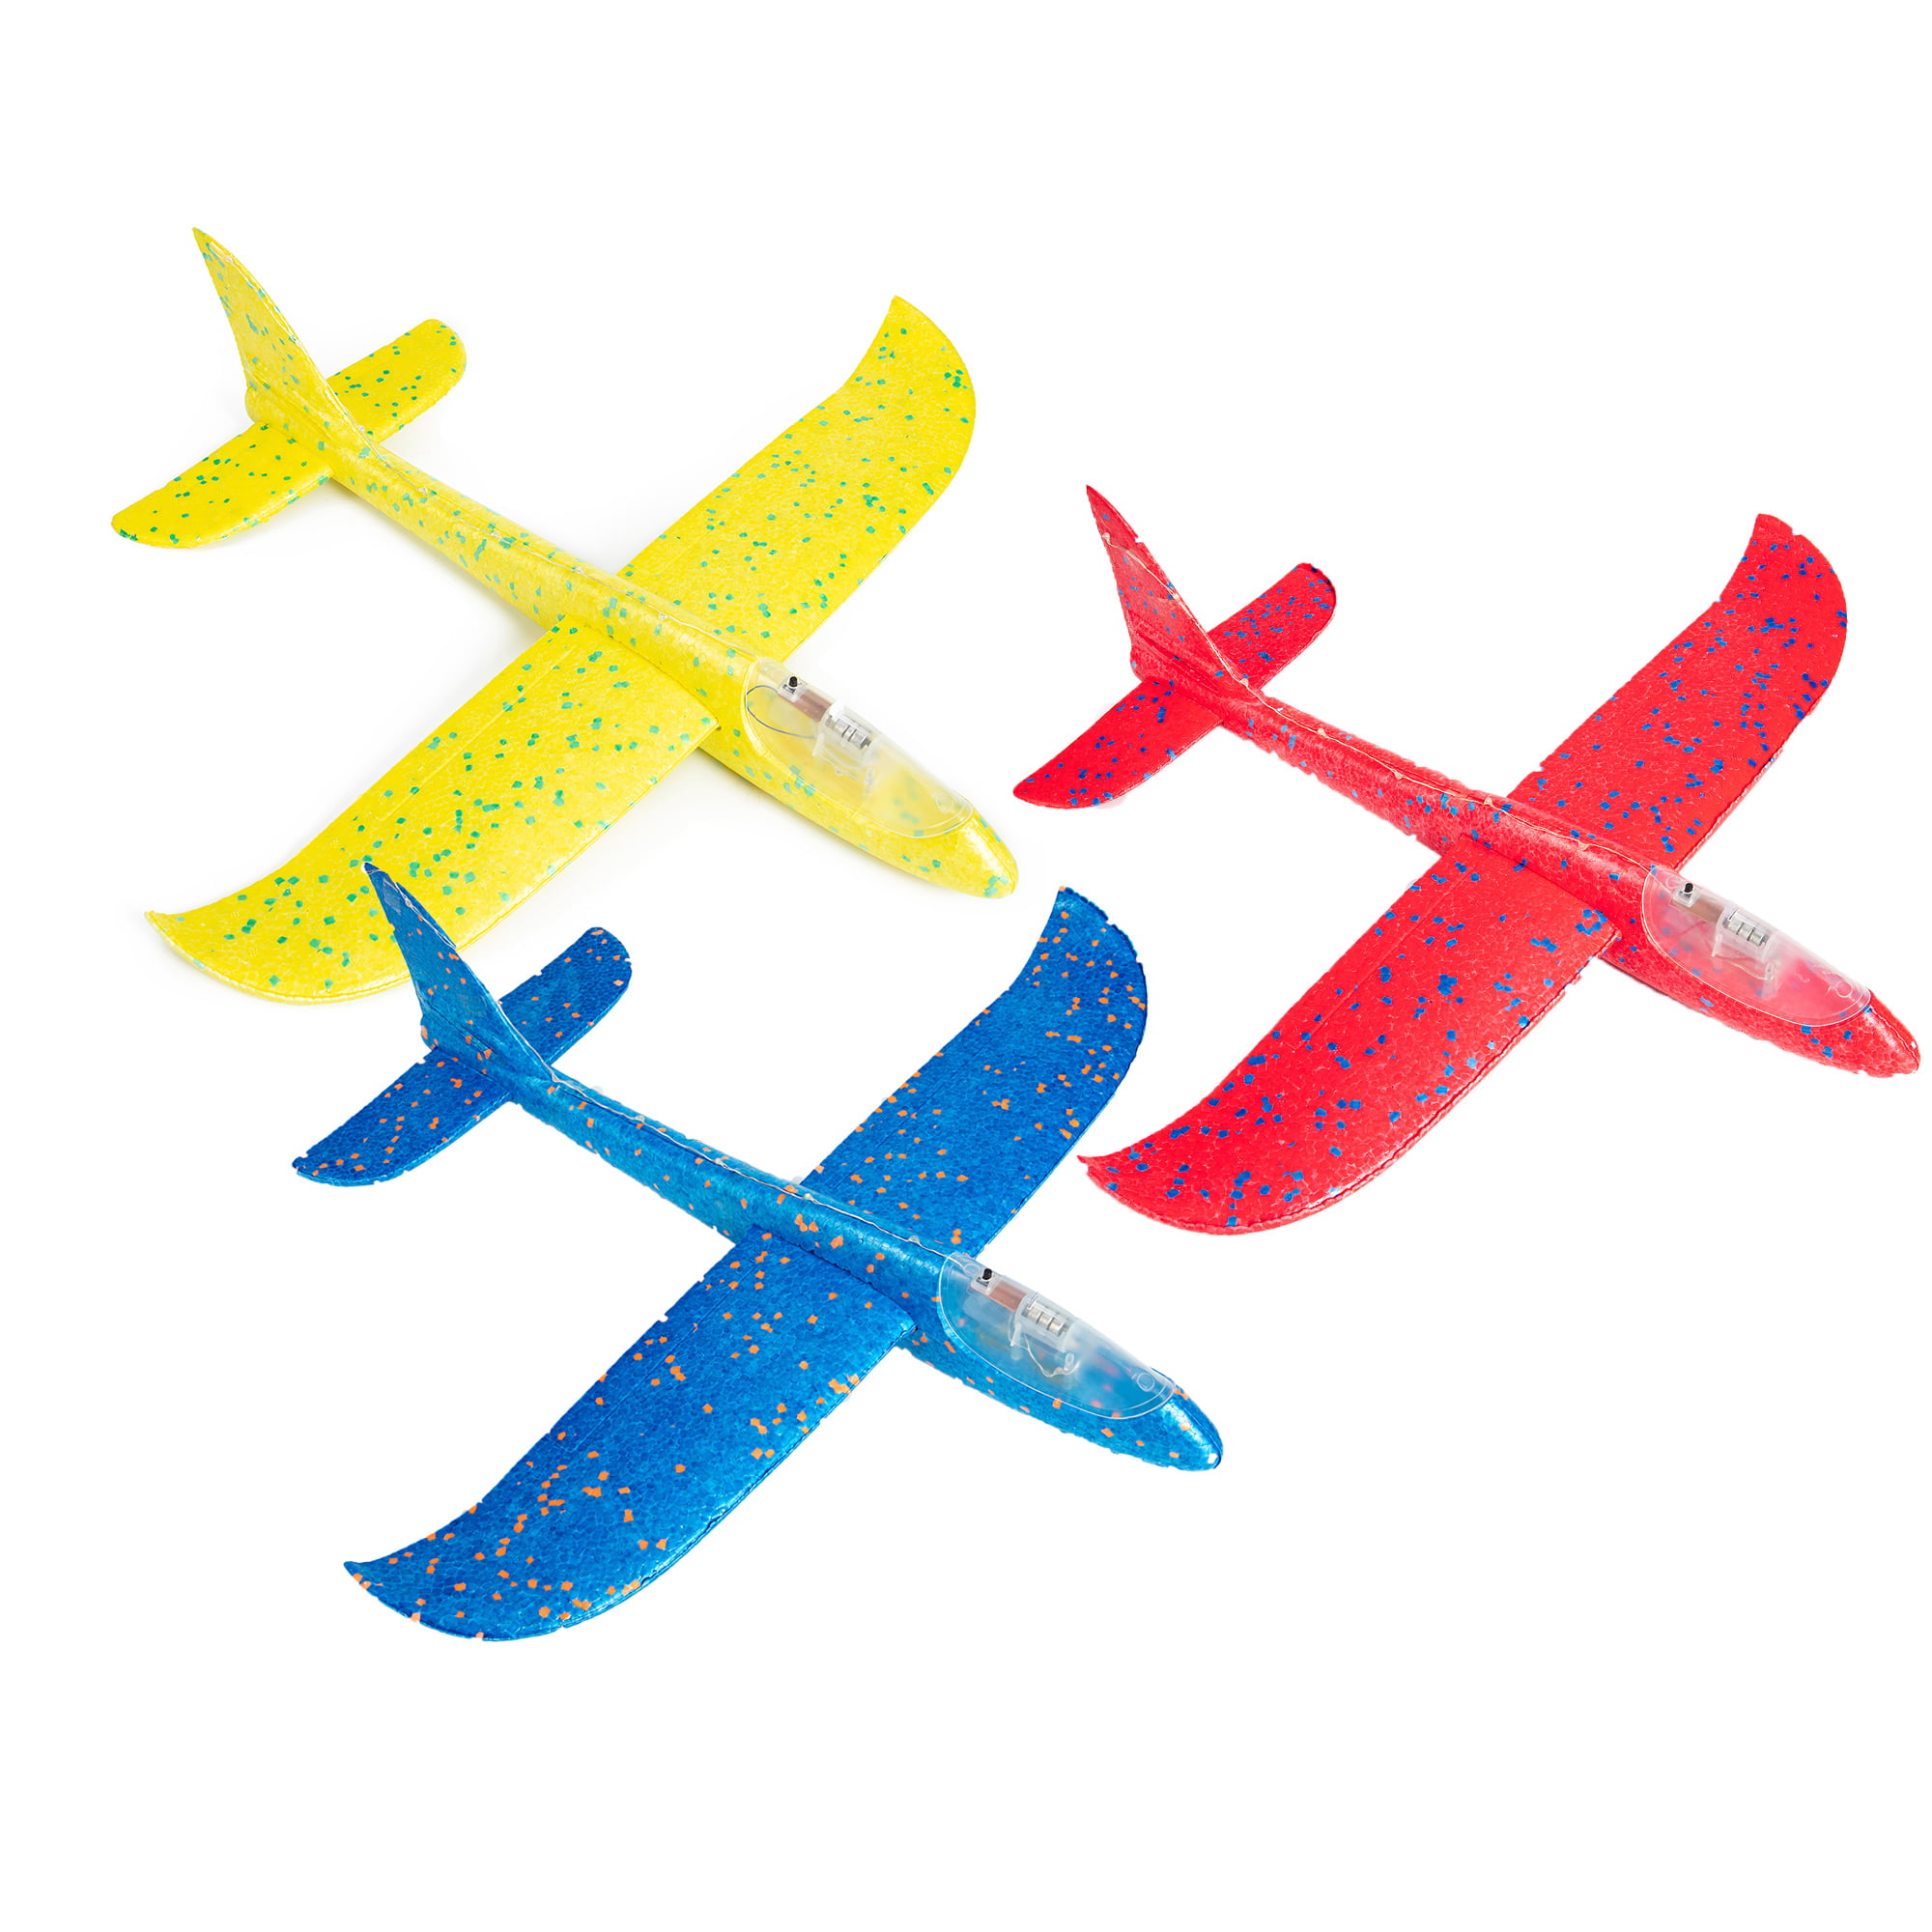 Rigel7 3 Pack Airplane Toy Throwing Foam Plane Gliders Flying Aircraft Best Outdoor Game Fun Flying Toy for Kids Children Boys Girls 